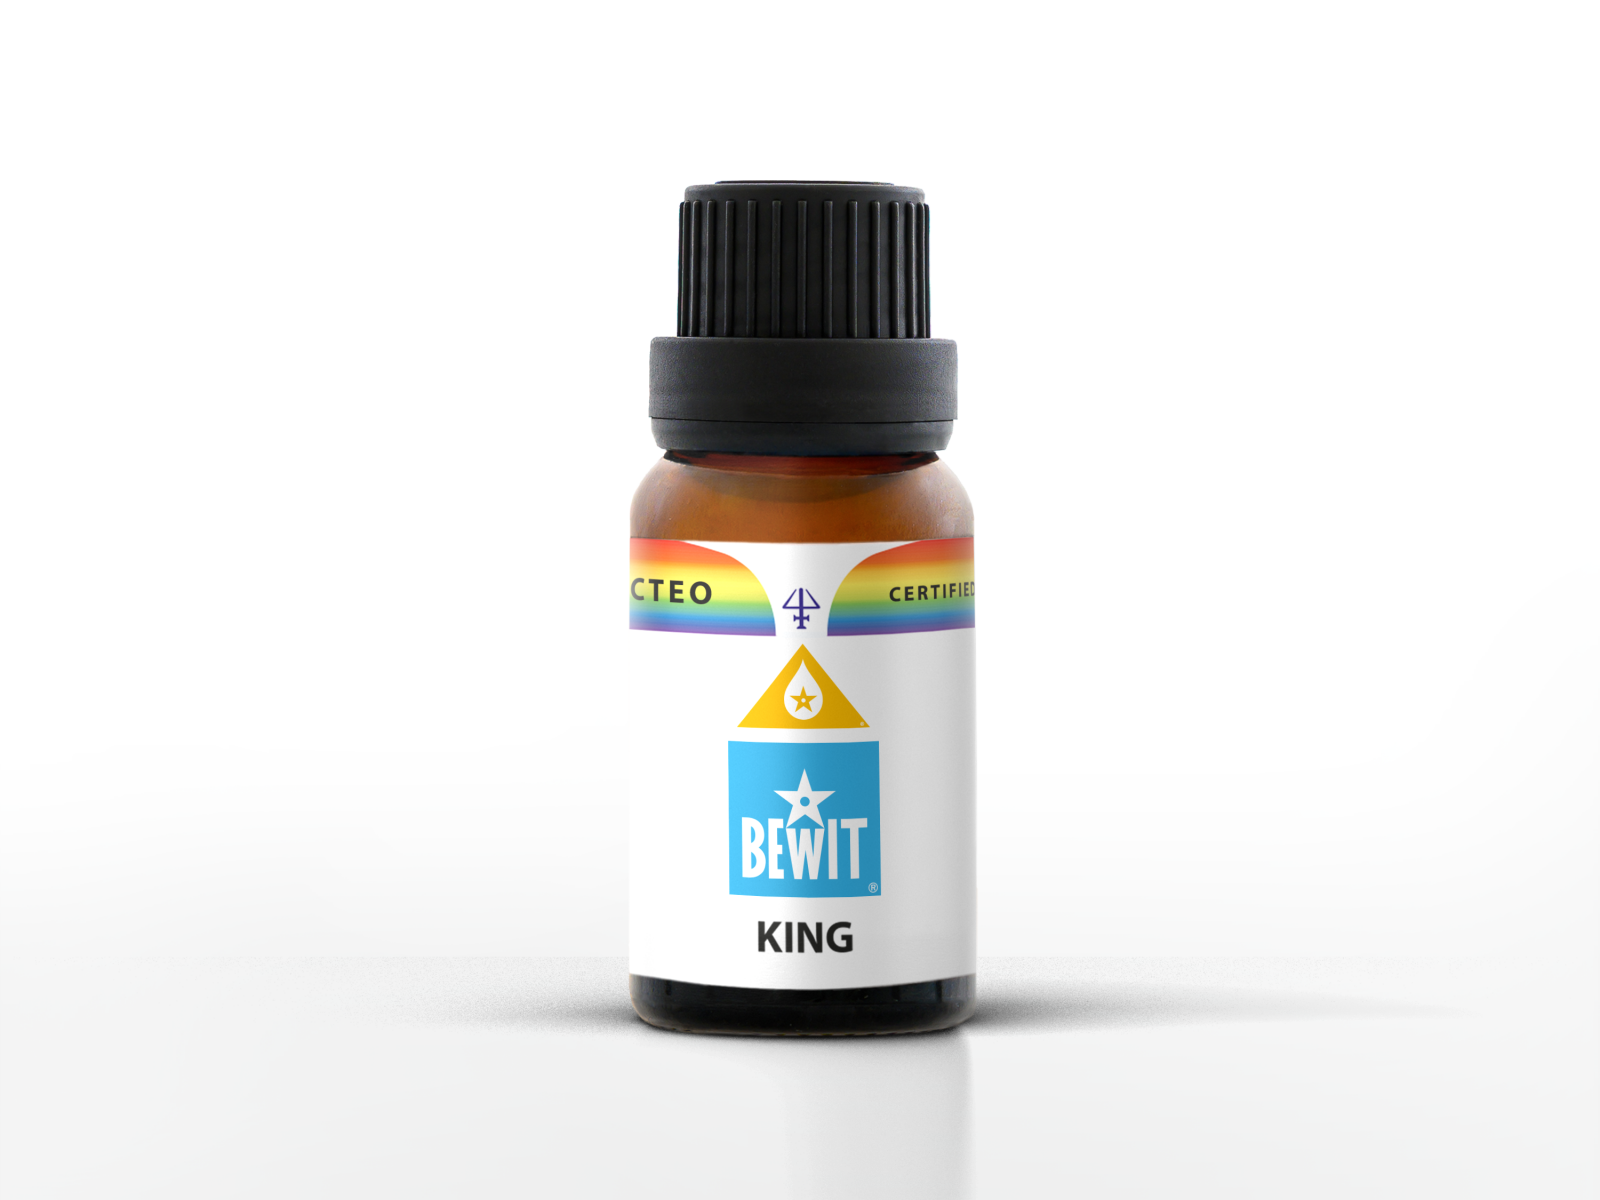 BEWIT KING - 100% natural blend of CTEO® essential oils